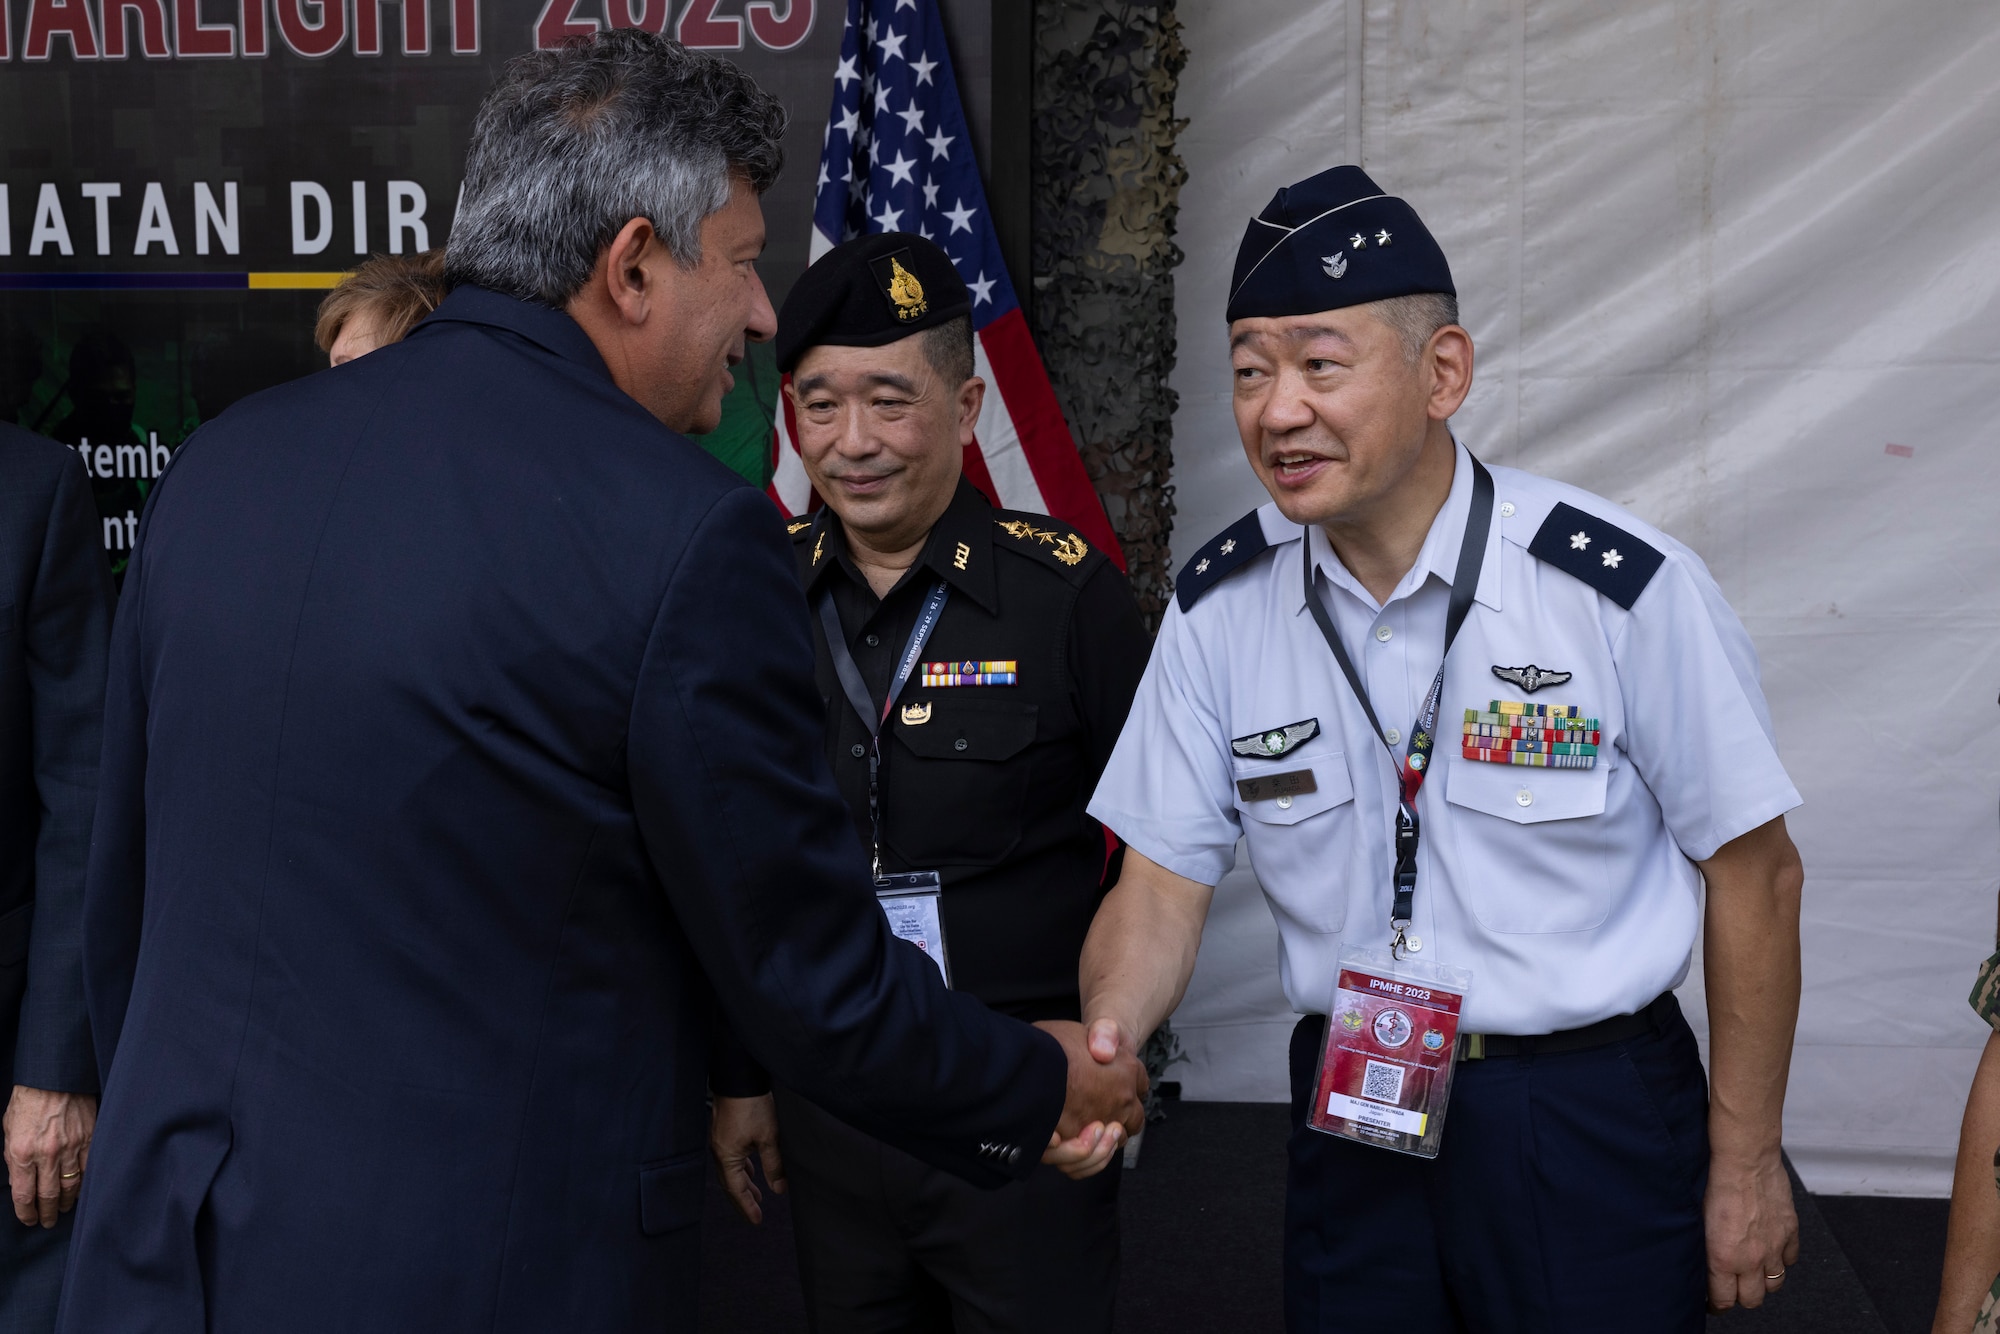 U.S. Charge d’affaires, a.i. Manu Bhalla, the deputy chief of mission at U.S. Embassy Malaysia, greets Japan Air Self-Defense Force Surgeon General of the Air Staff Office Maj. Gen. Naruo Kuwada, before doing officiating the handover of two mobile Role 2 surgical/critical care systems, and a Role 3 field hospital from U.S. Indo-Pacific Command to the Malaysian Armed Forces. Indo-Pacific Military Health Exchange 2023 in Kuala Lumpur, Malaysia, September 27, 2023.